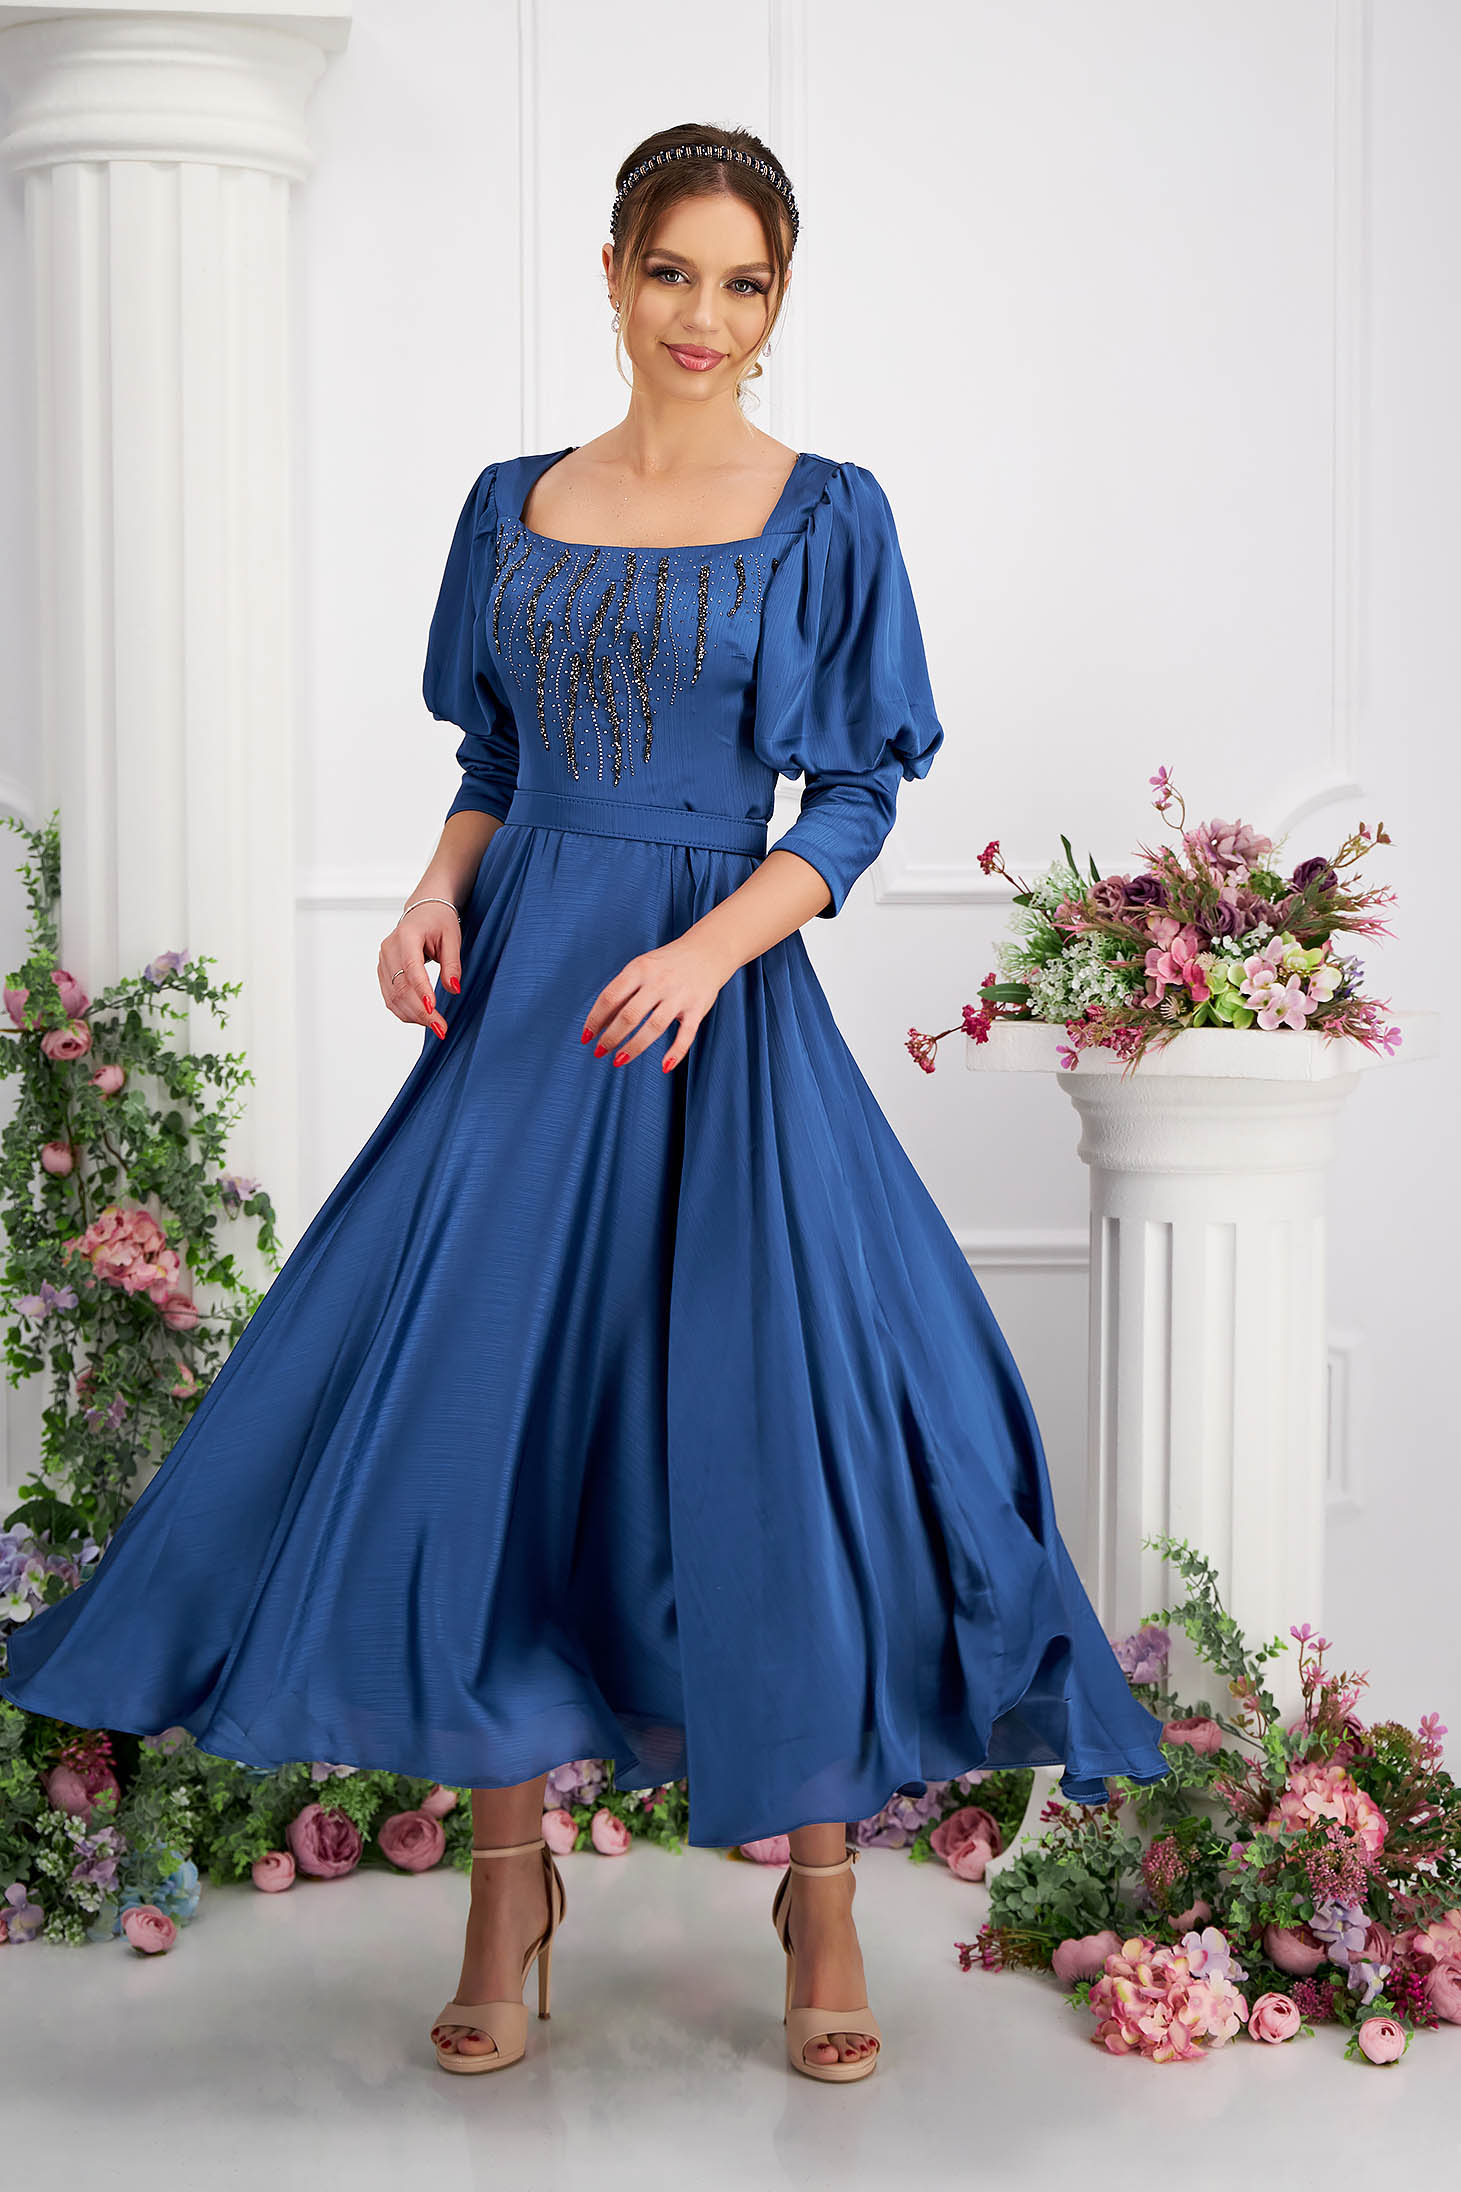 Blue dress from veil fabric from satin fabric texture midi with puffed sleeves strass cloche